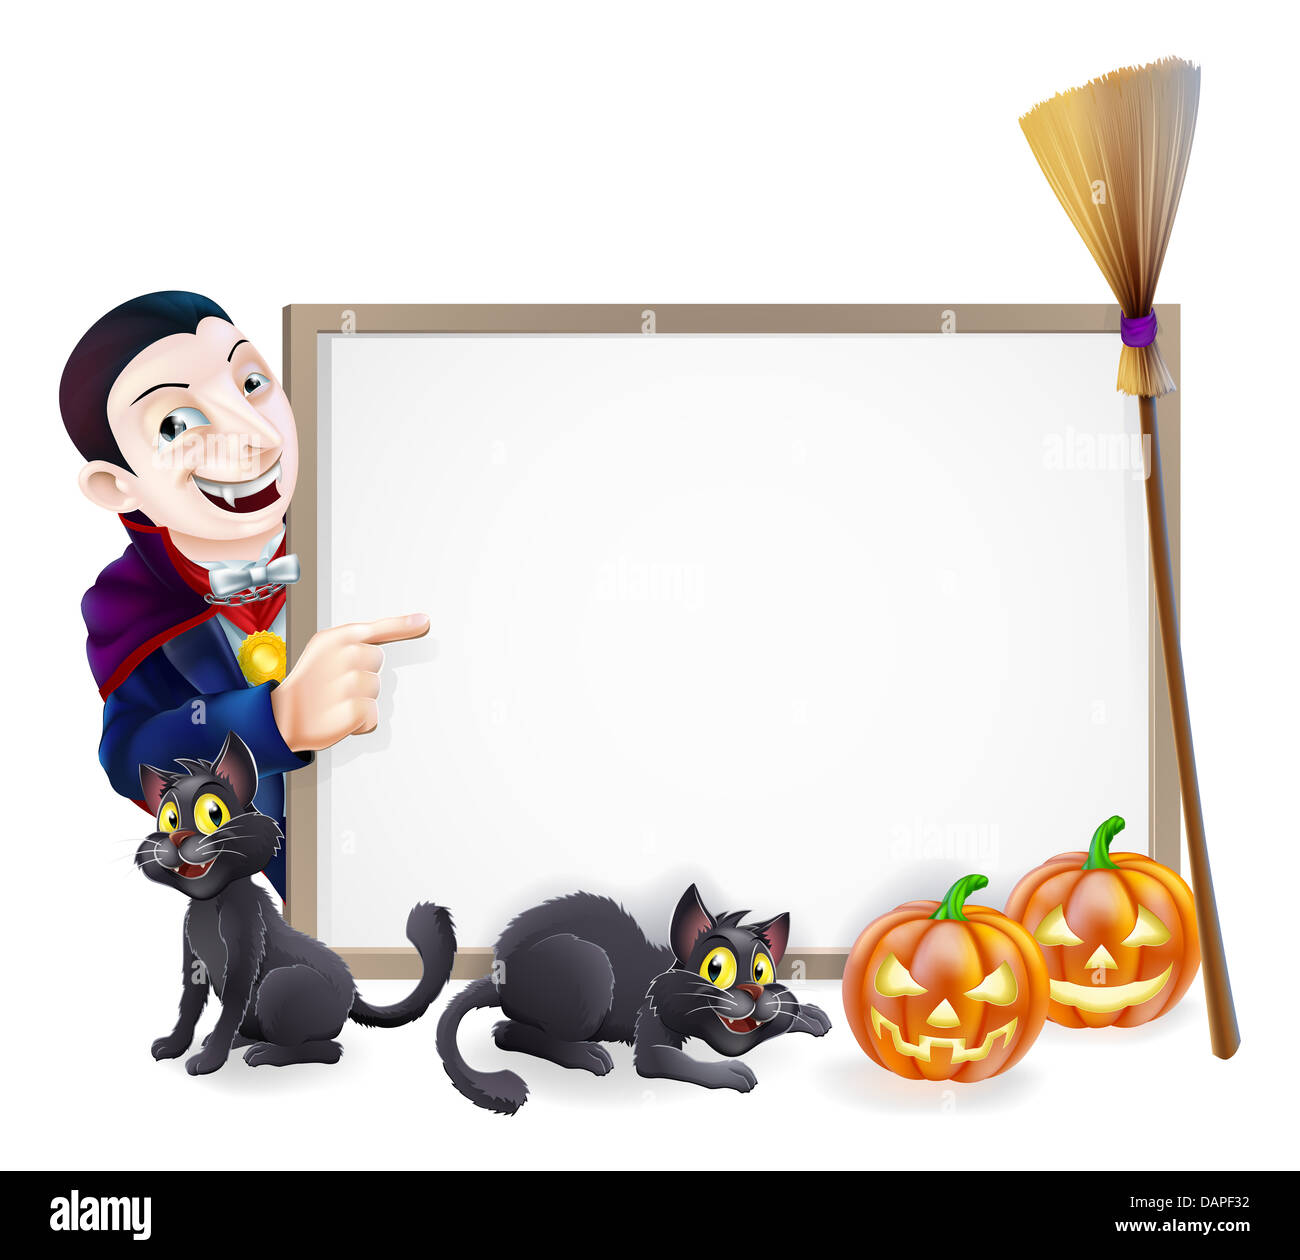 Halloween sign with orange Halloween pumpkins and black witch's cats, witch's broom stick and cartoon Dracula Vampire Character Stock Photo